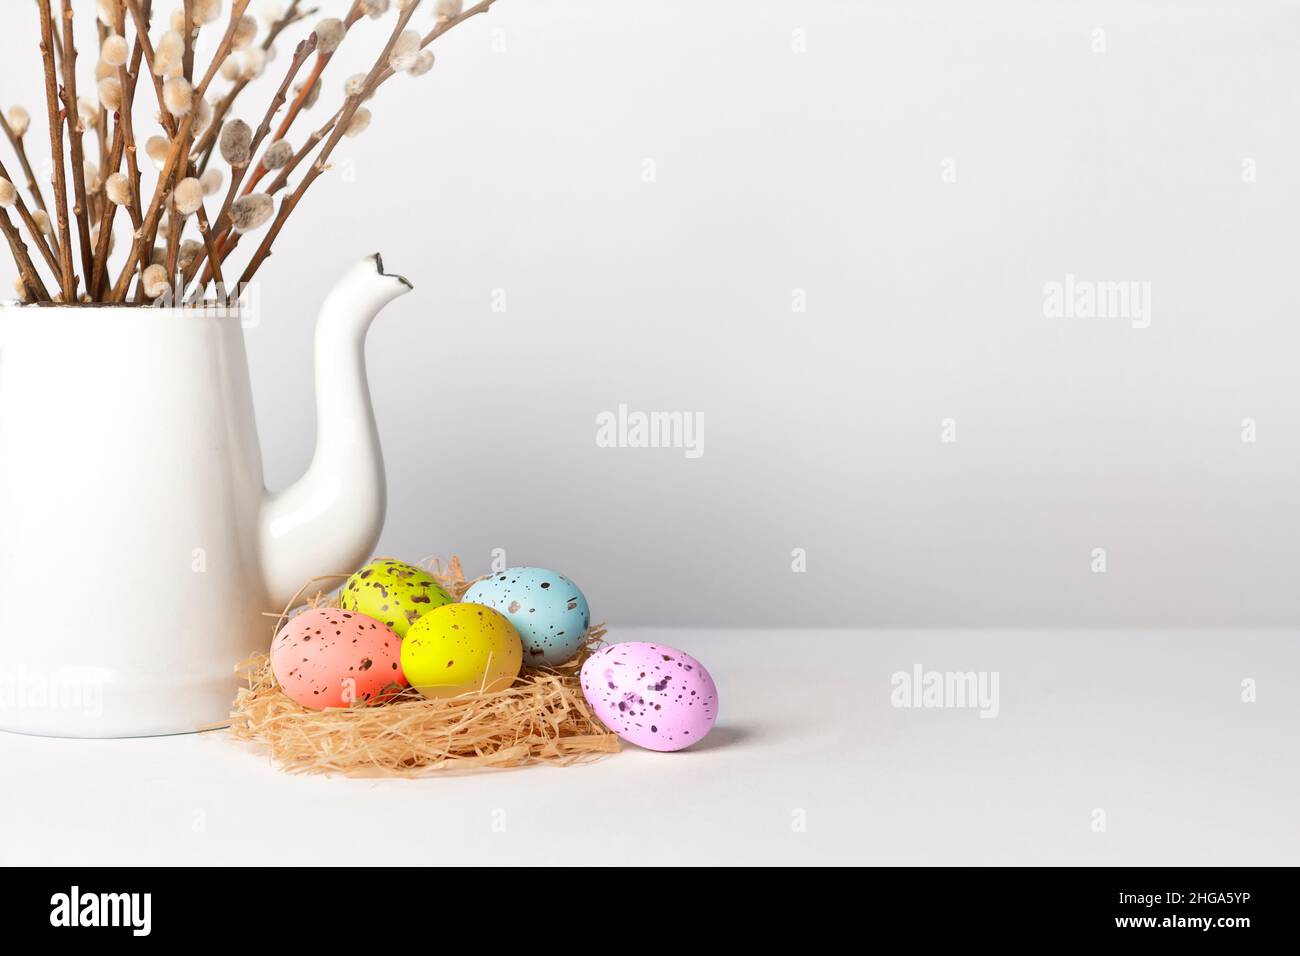 Colorful Easter eggs on a nest with pussy willow twigs in a jug, white background, copy space for Happy Easter text. Stock Photo